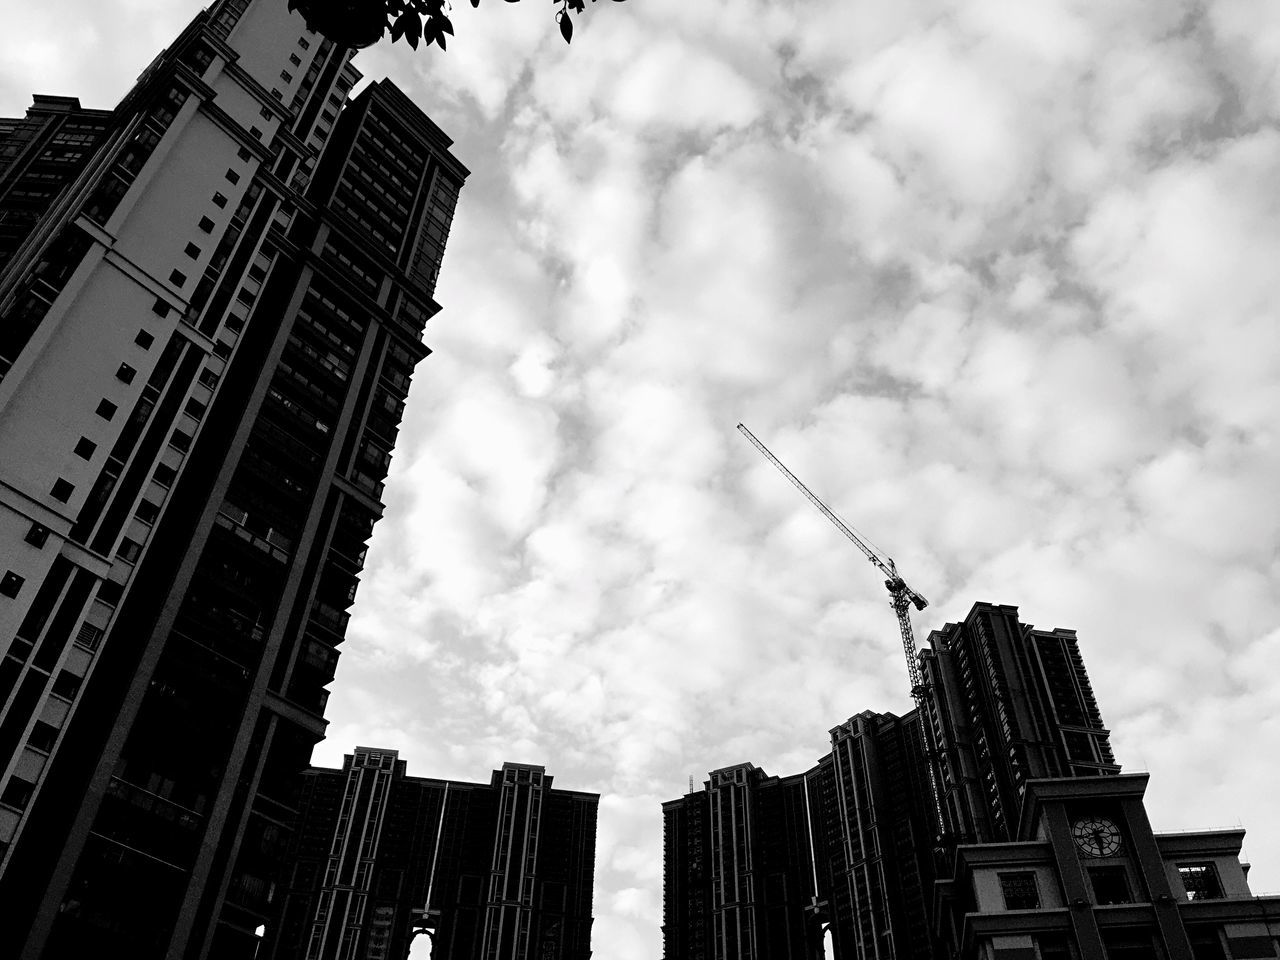 building exterior, architecture, built structure, low angle view, sky, city, cloud - sky, building, cloudy, crane - construction machinery, skyscraper, tall - high, development, office building, modern, cloud, bird, construction site, outdoors, day